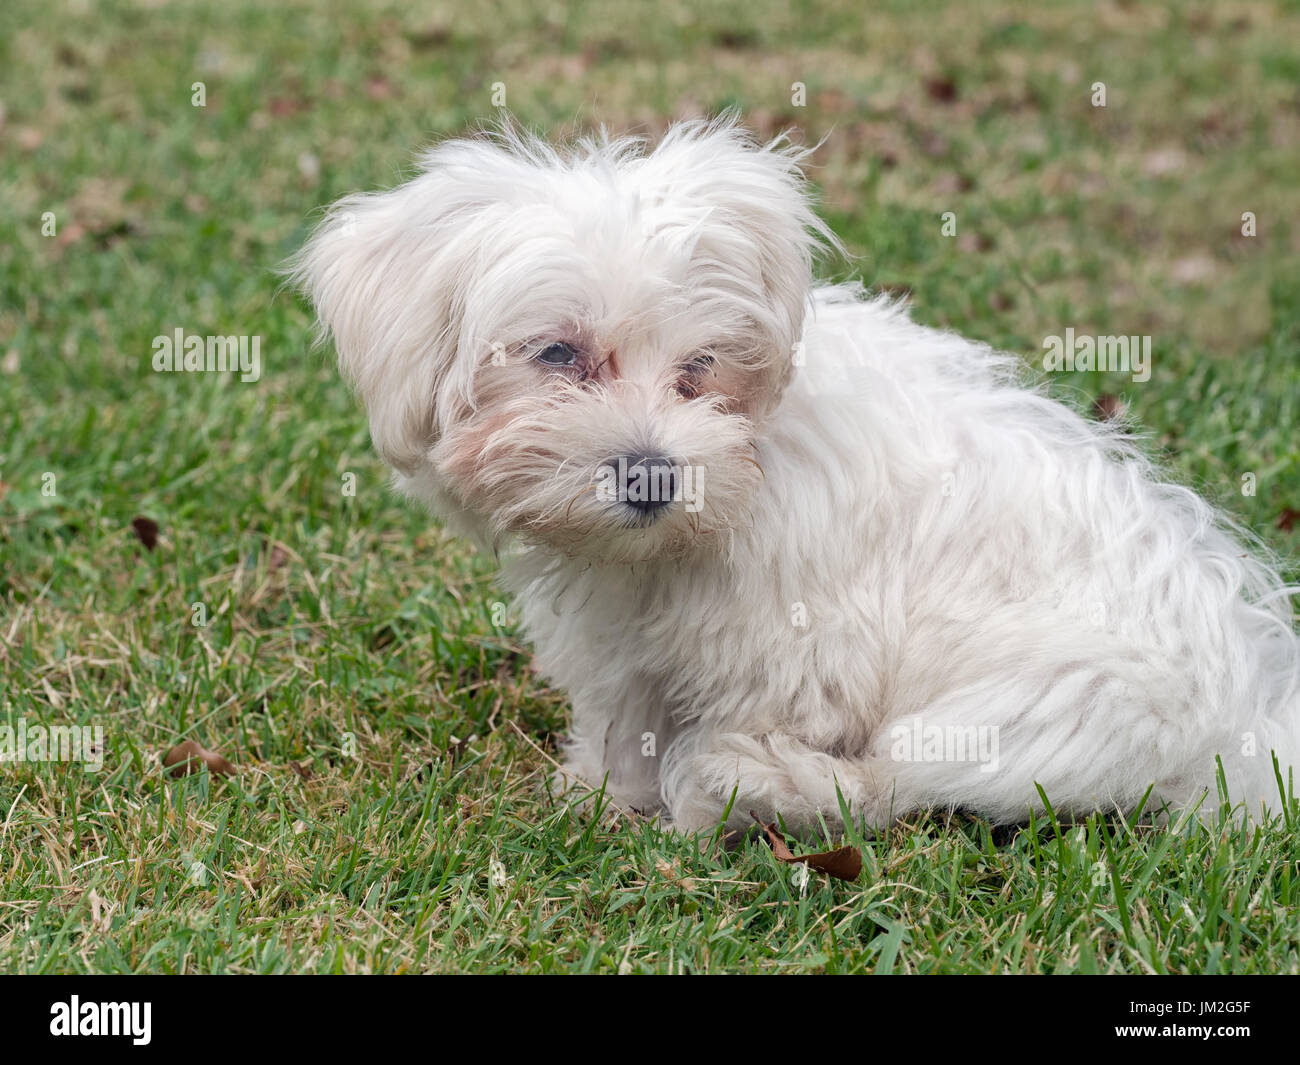 Small old dog. With collar, no lead. Stock Photo